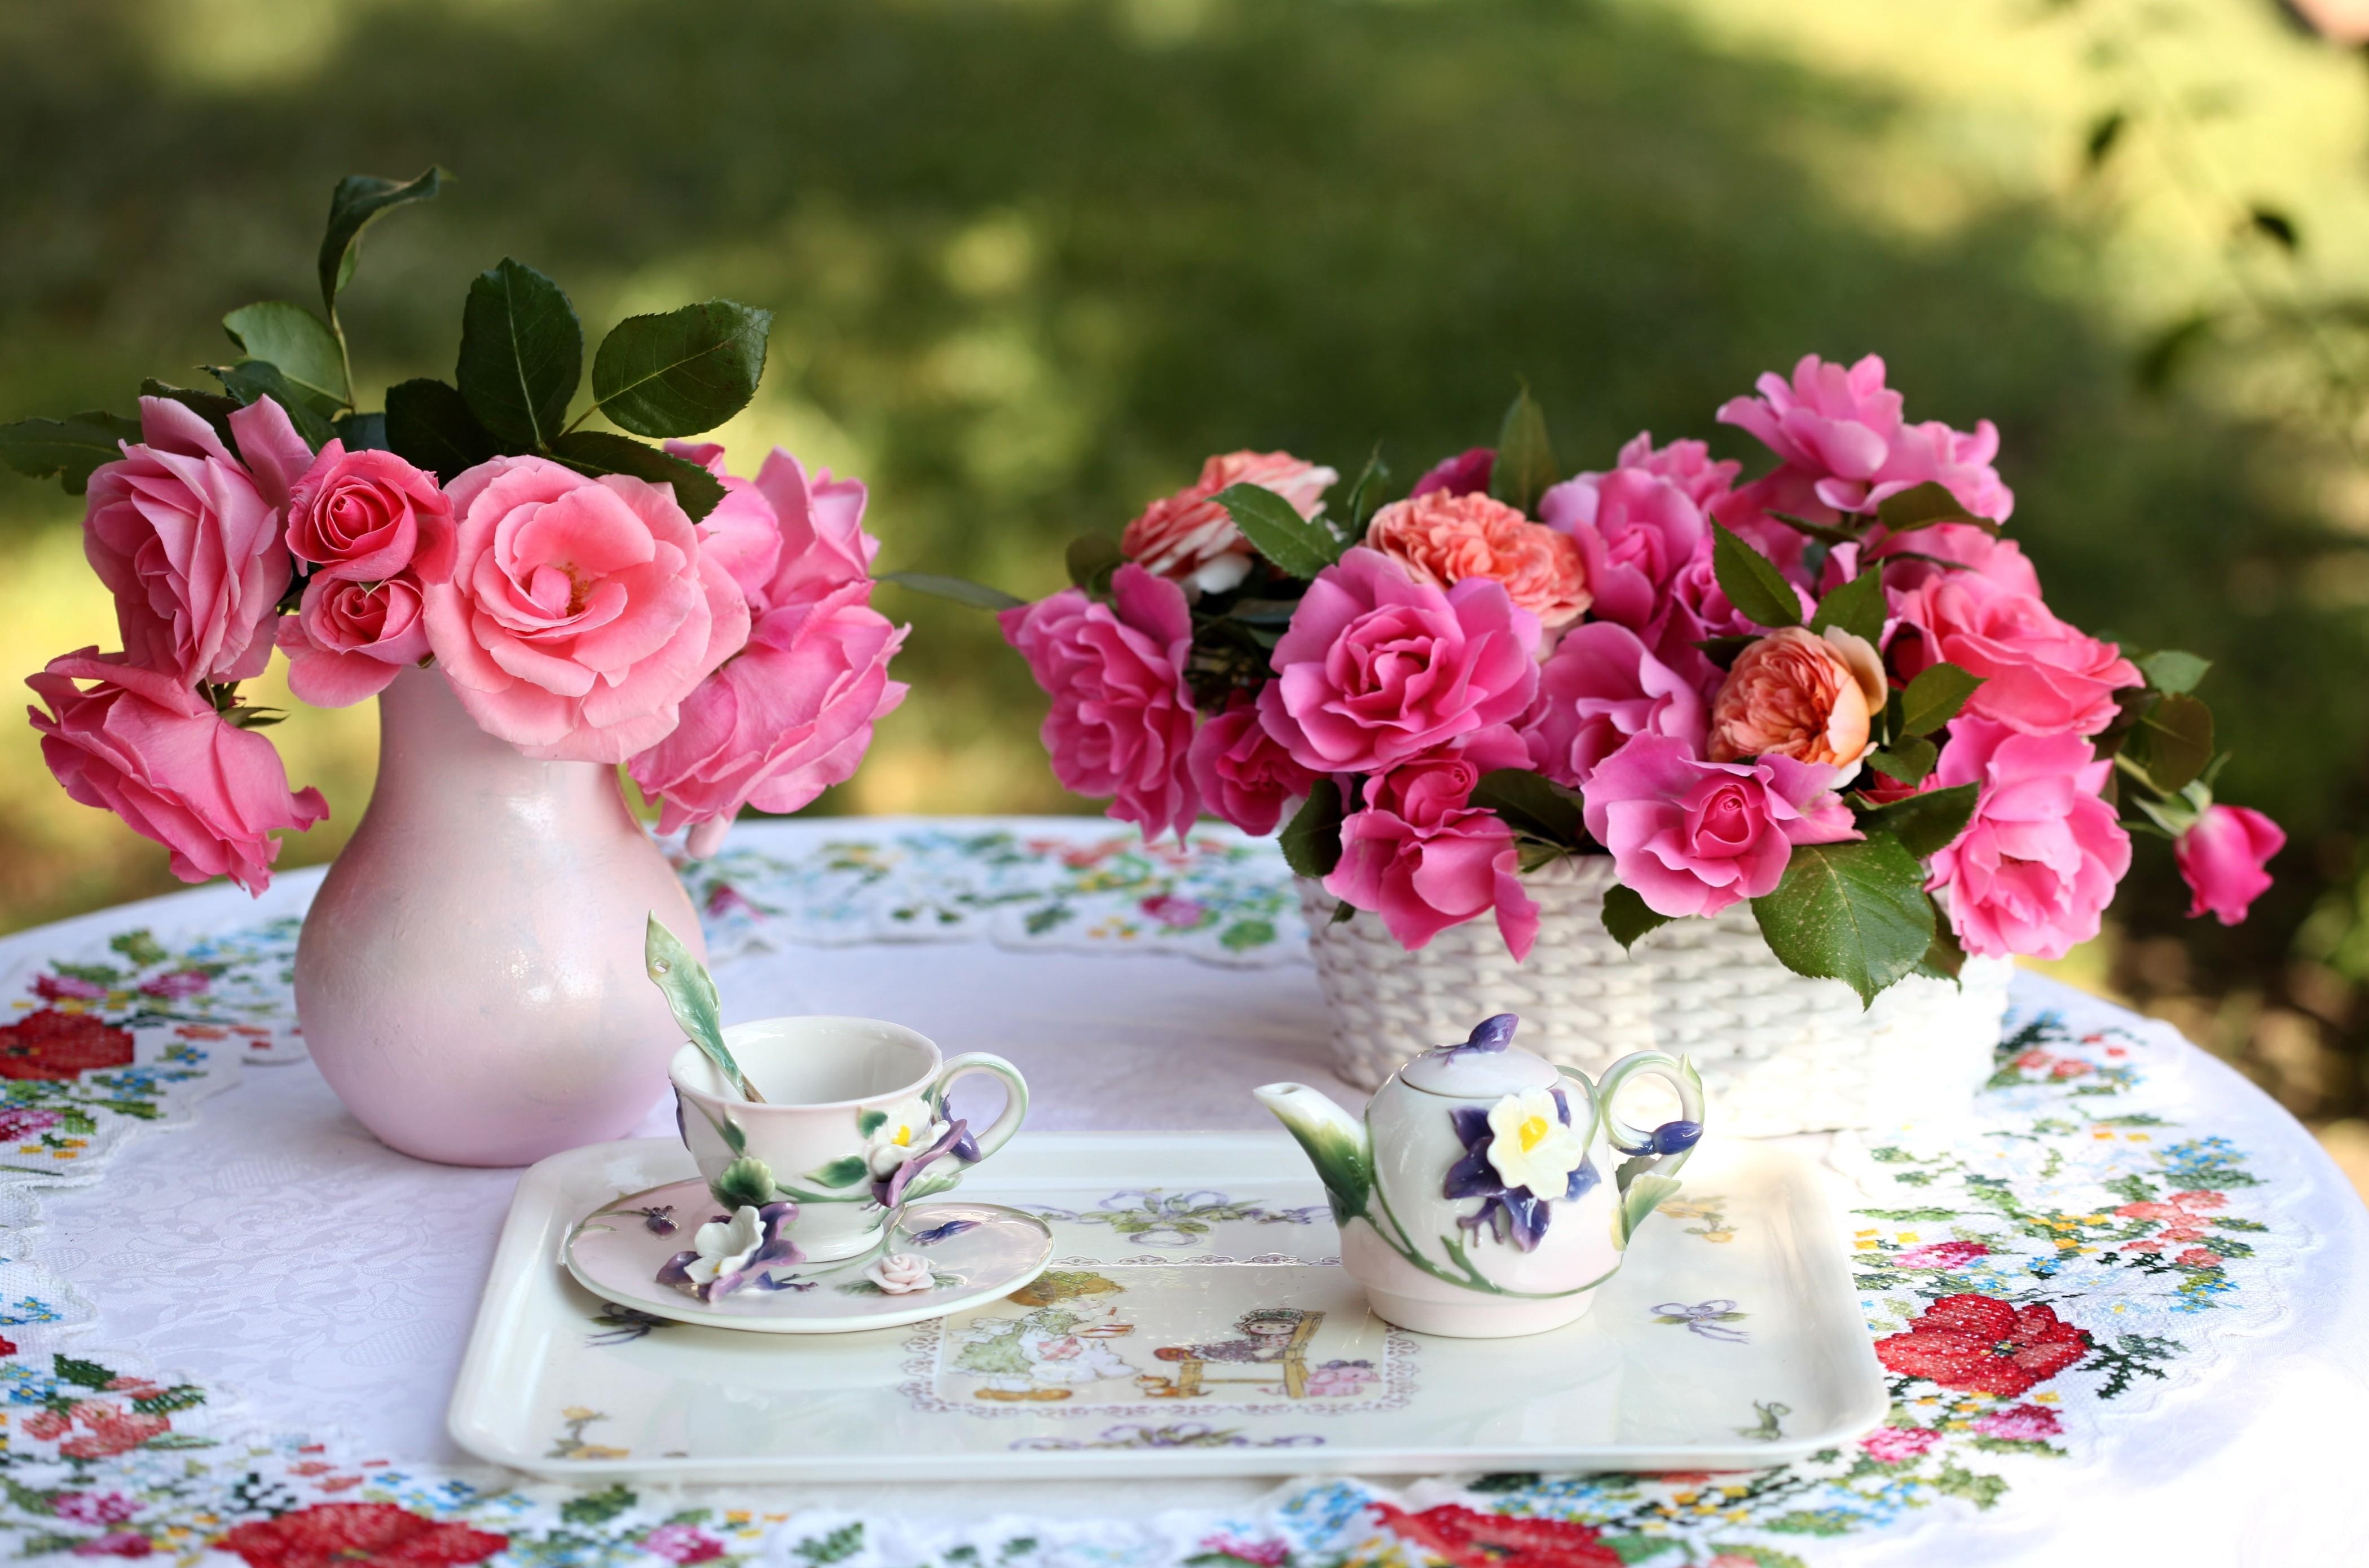 115929 download wallpaper flowers, roses, bouquets, table, vase, basket, service, tea drinking, tea party, tablecloth screensavers and pictures for free